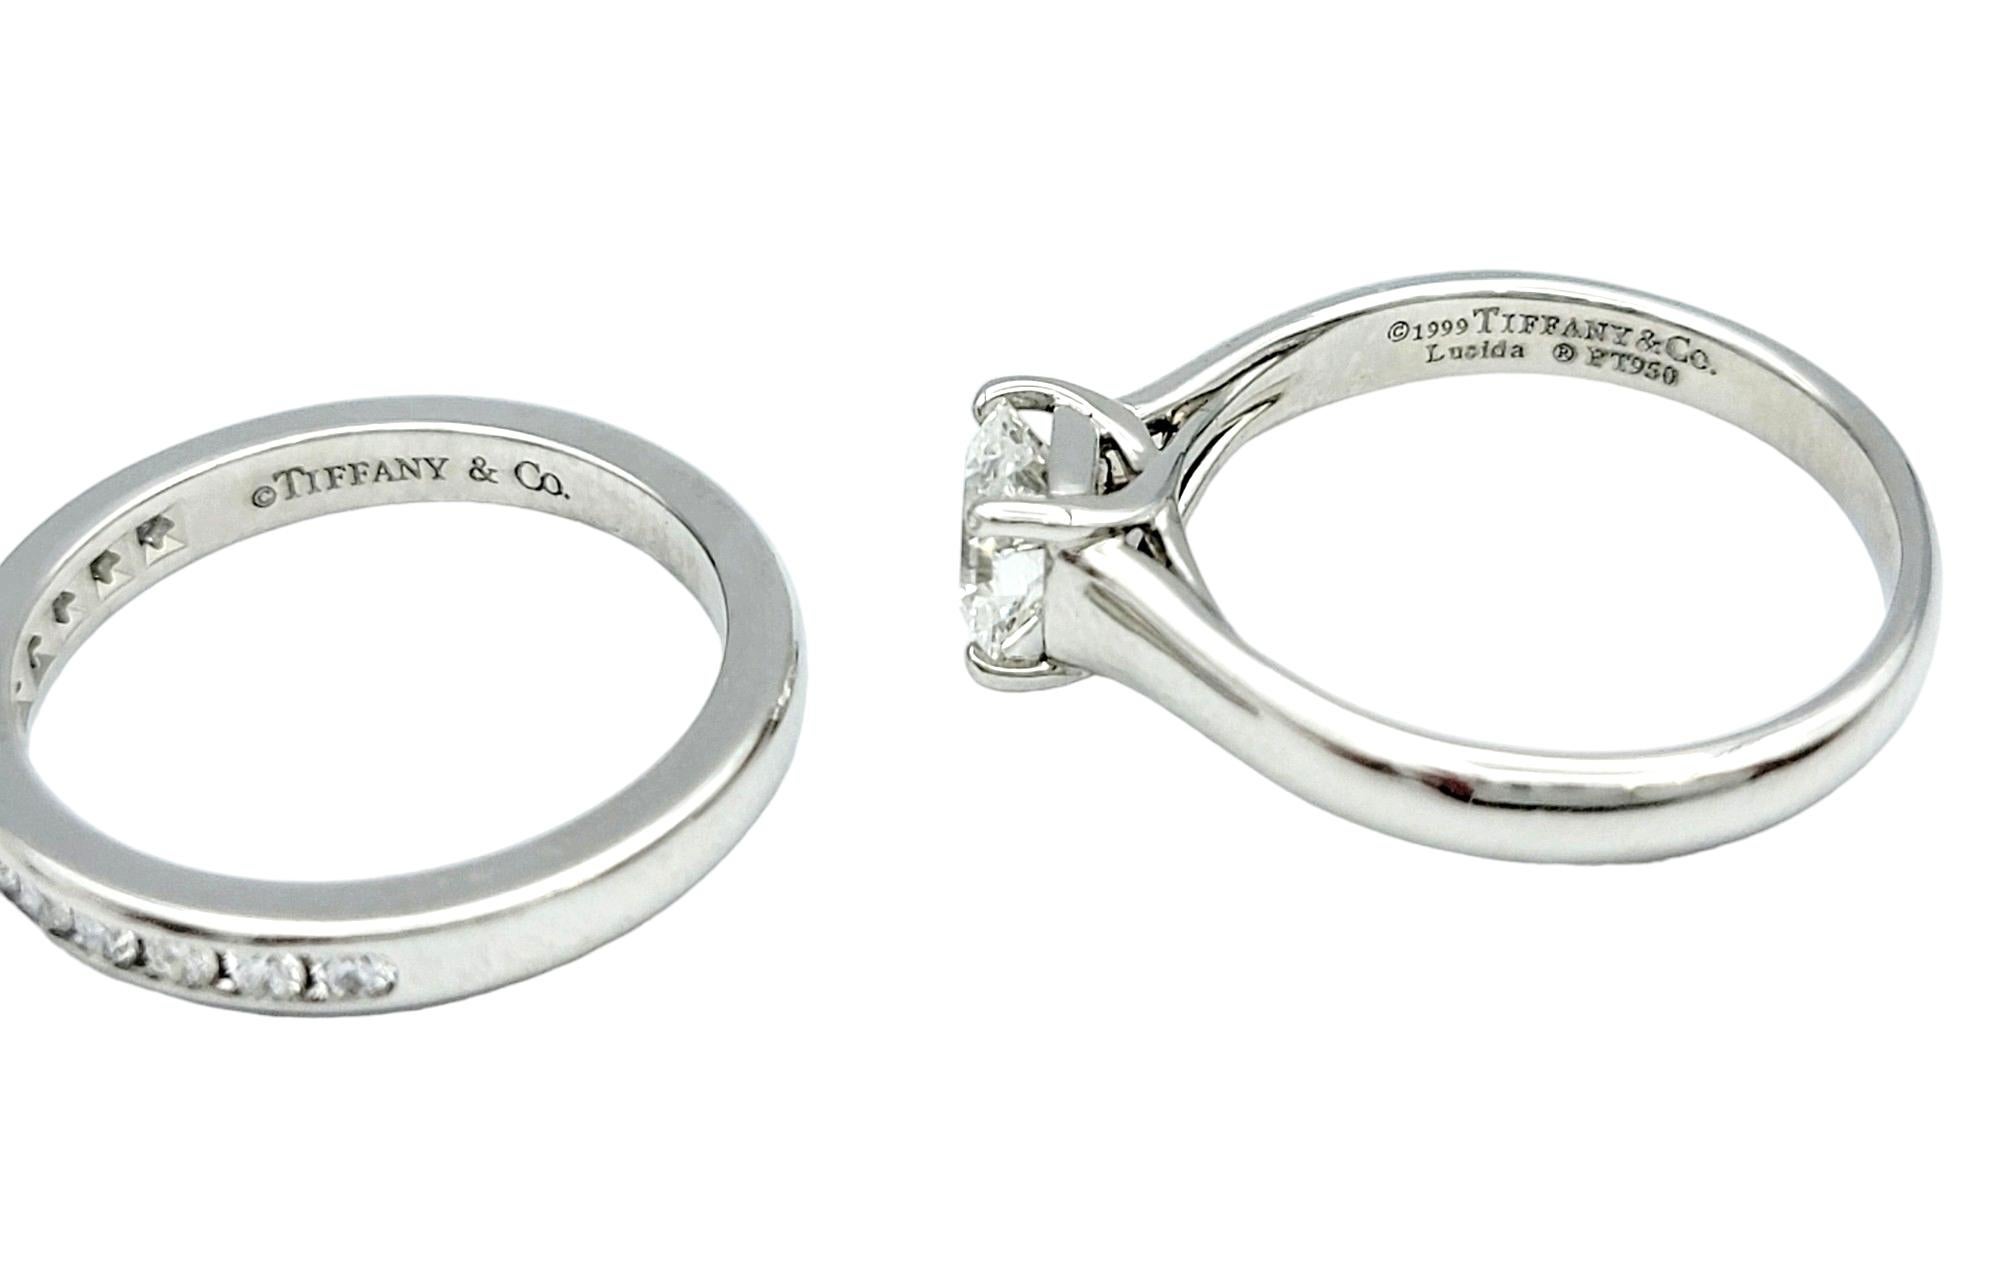 Tiffany & Co. Vintage .66 Lucida Solitaire Platinum Engagement Ring and Band Set In Excellent Condition For Sale In Scottsdale, AZ